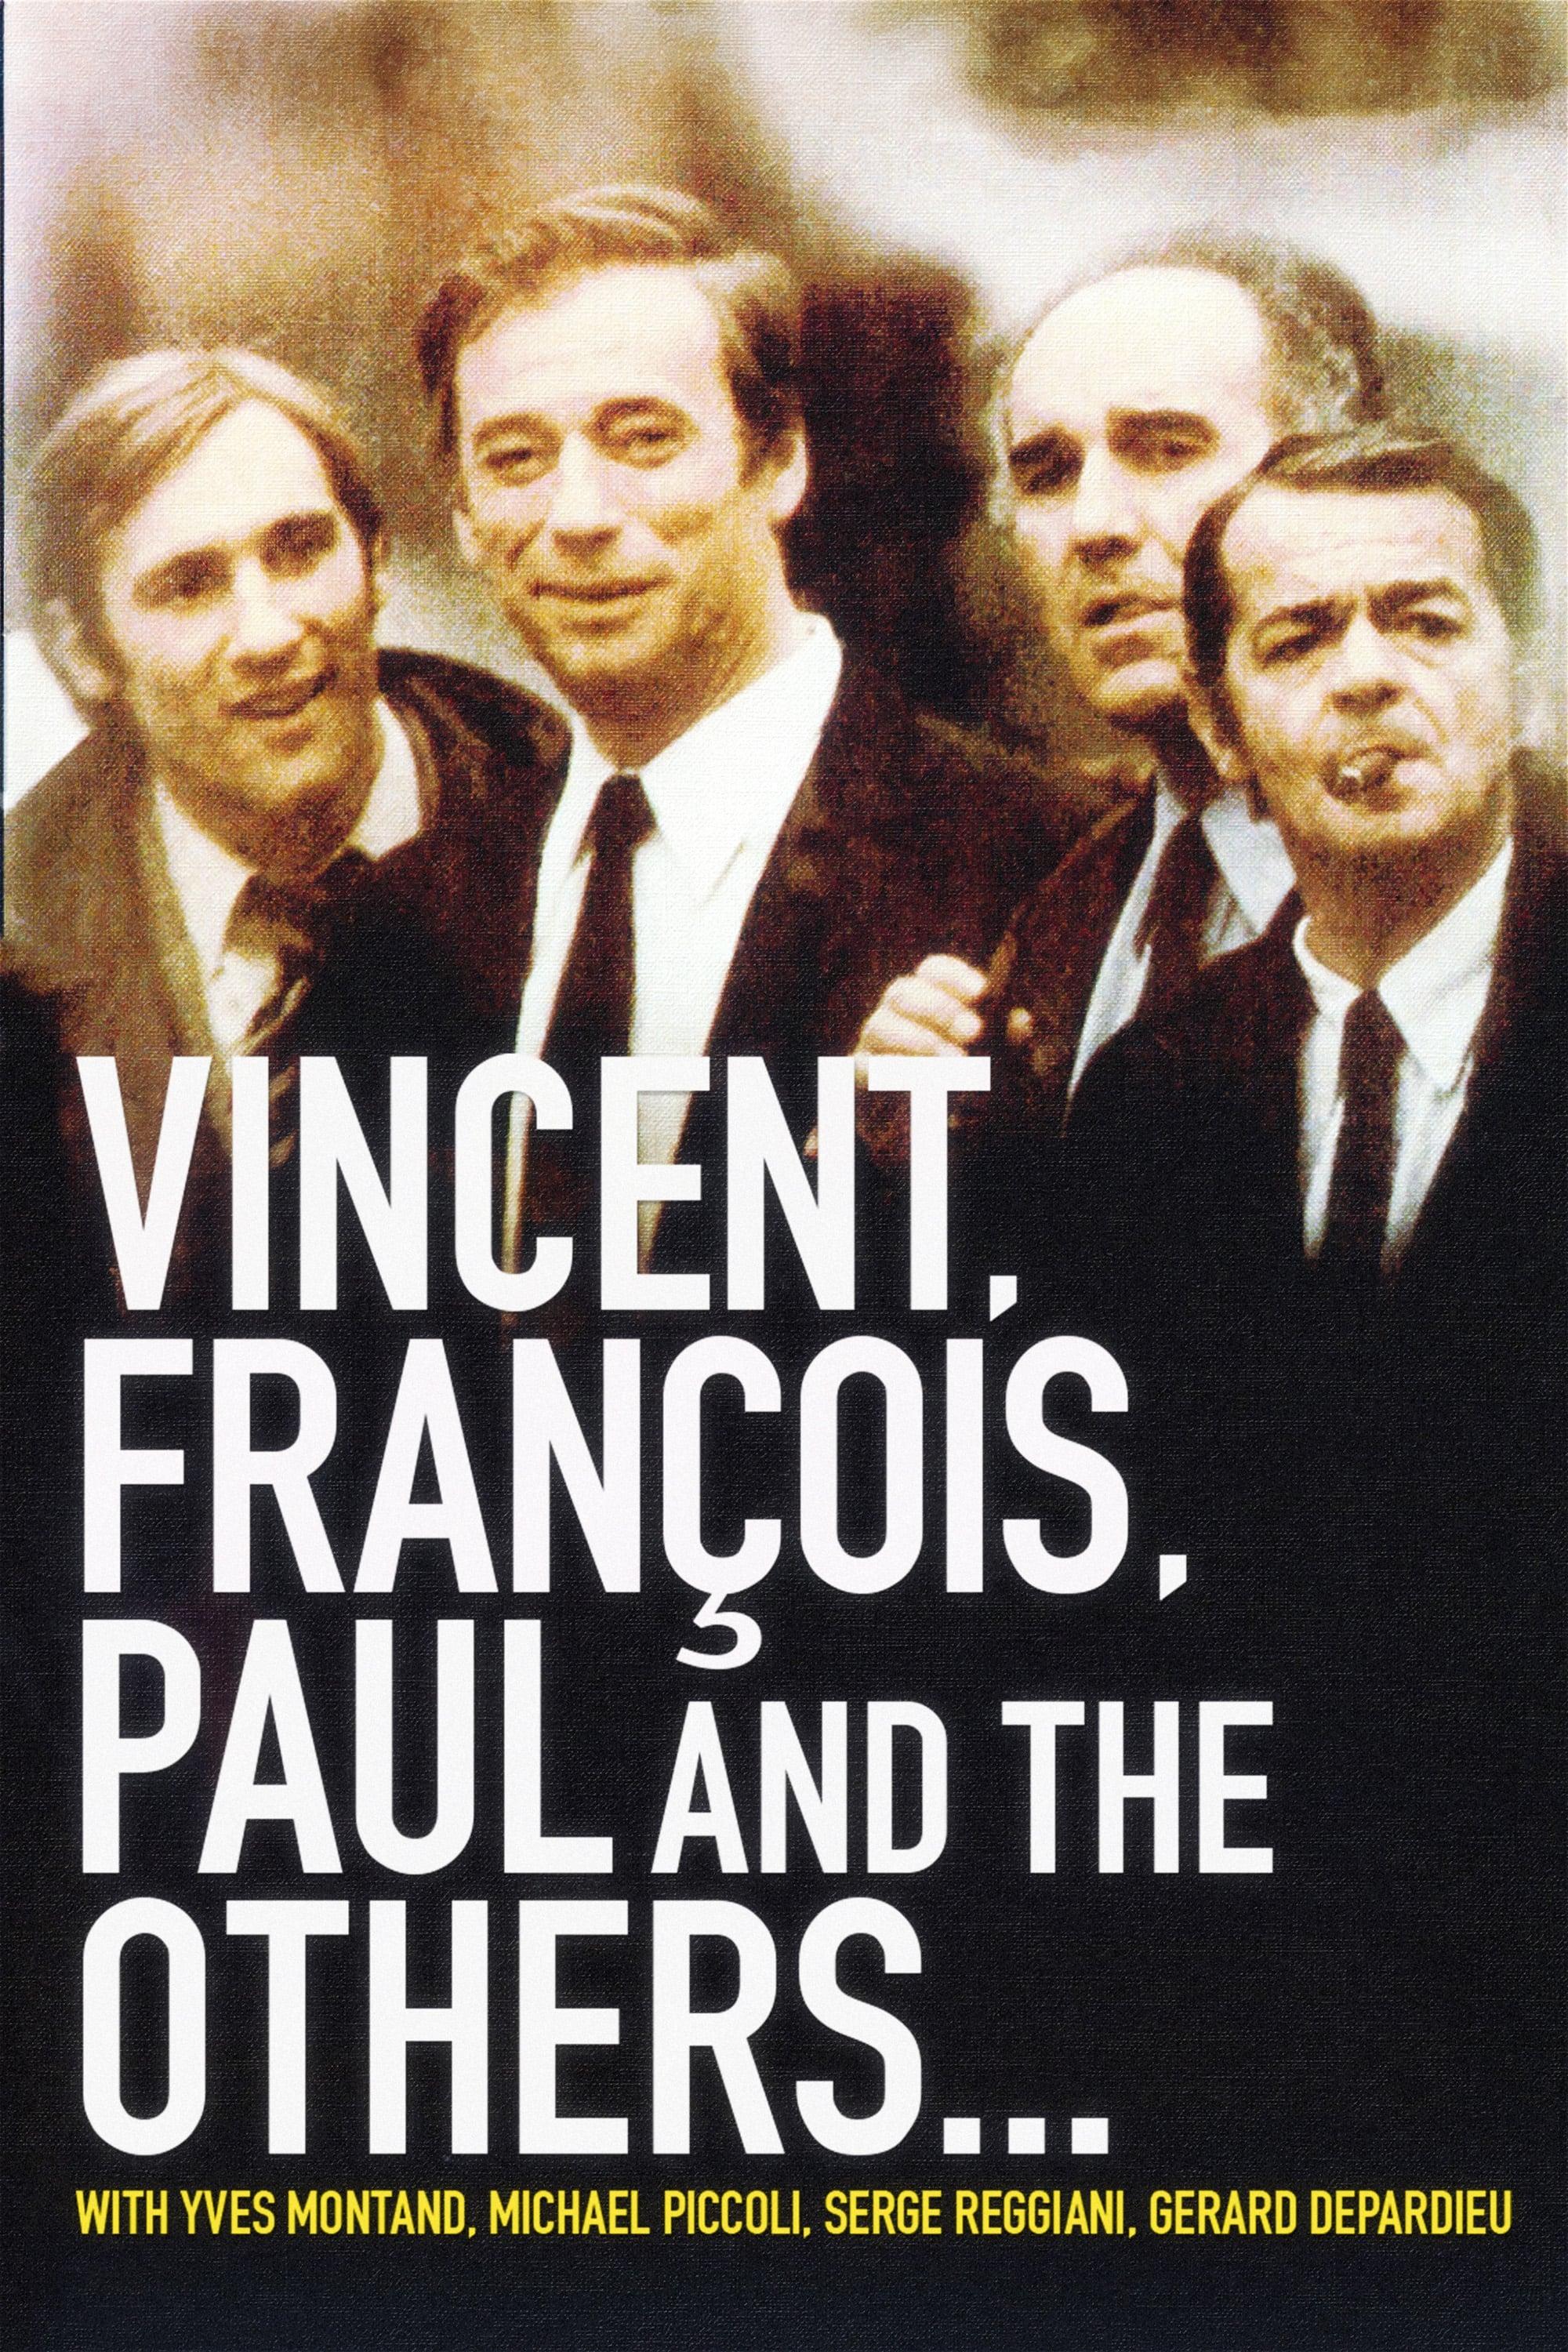 Vincent, Francois, Paul and the Others poster